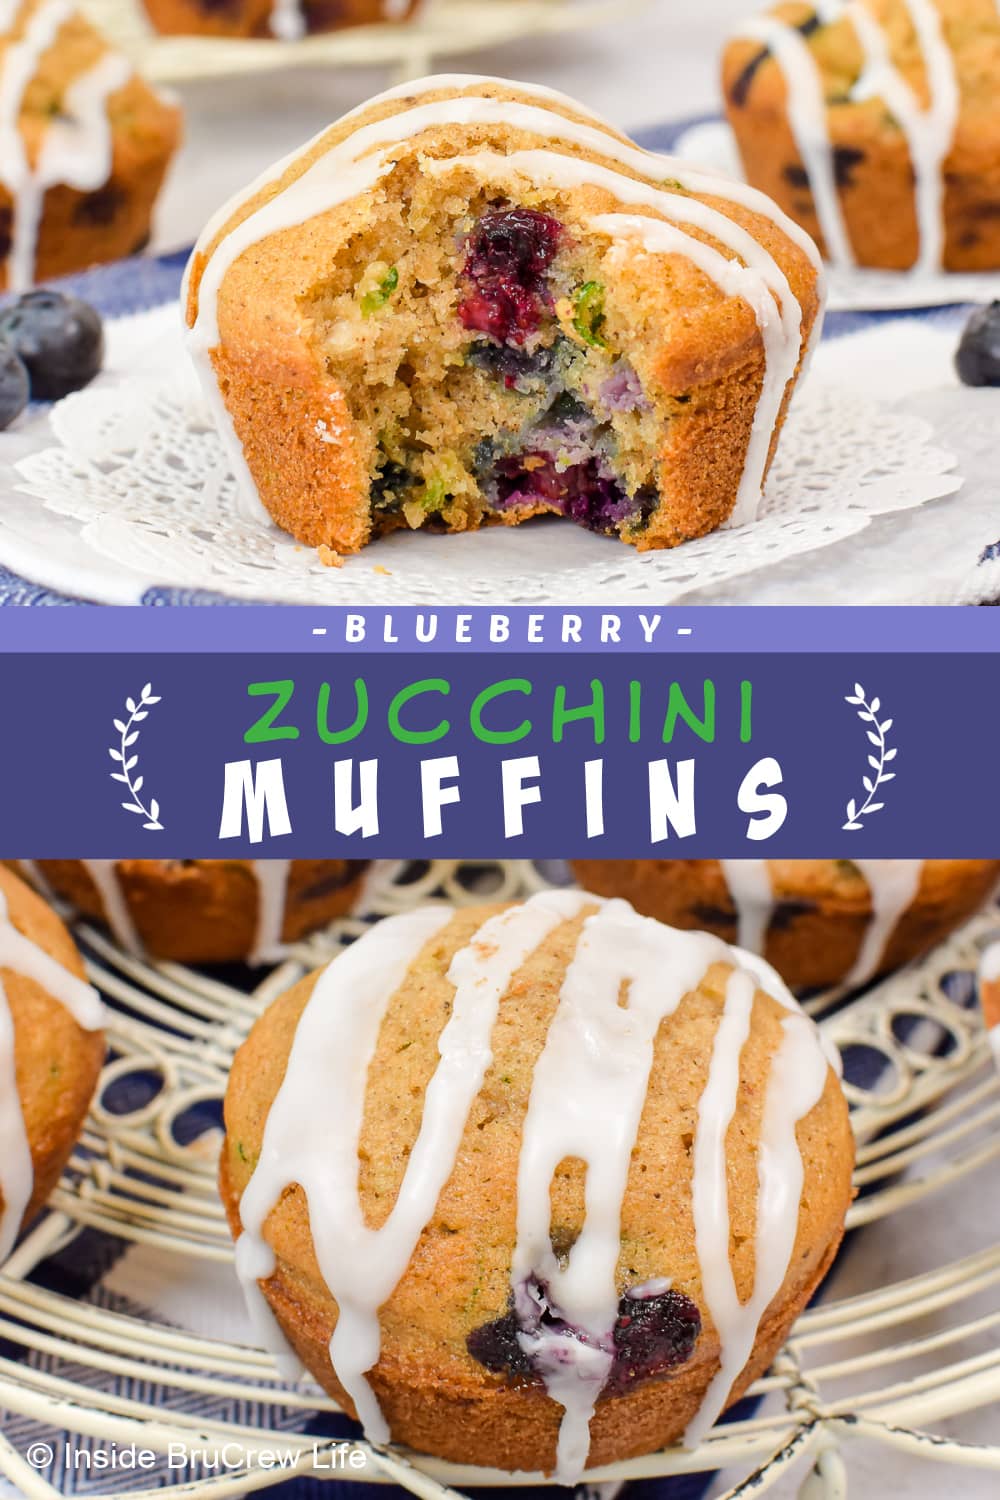 Two pictures of muffins collaged together with a blue text box.